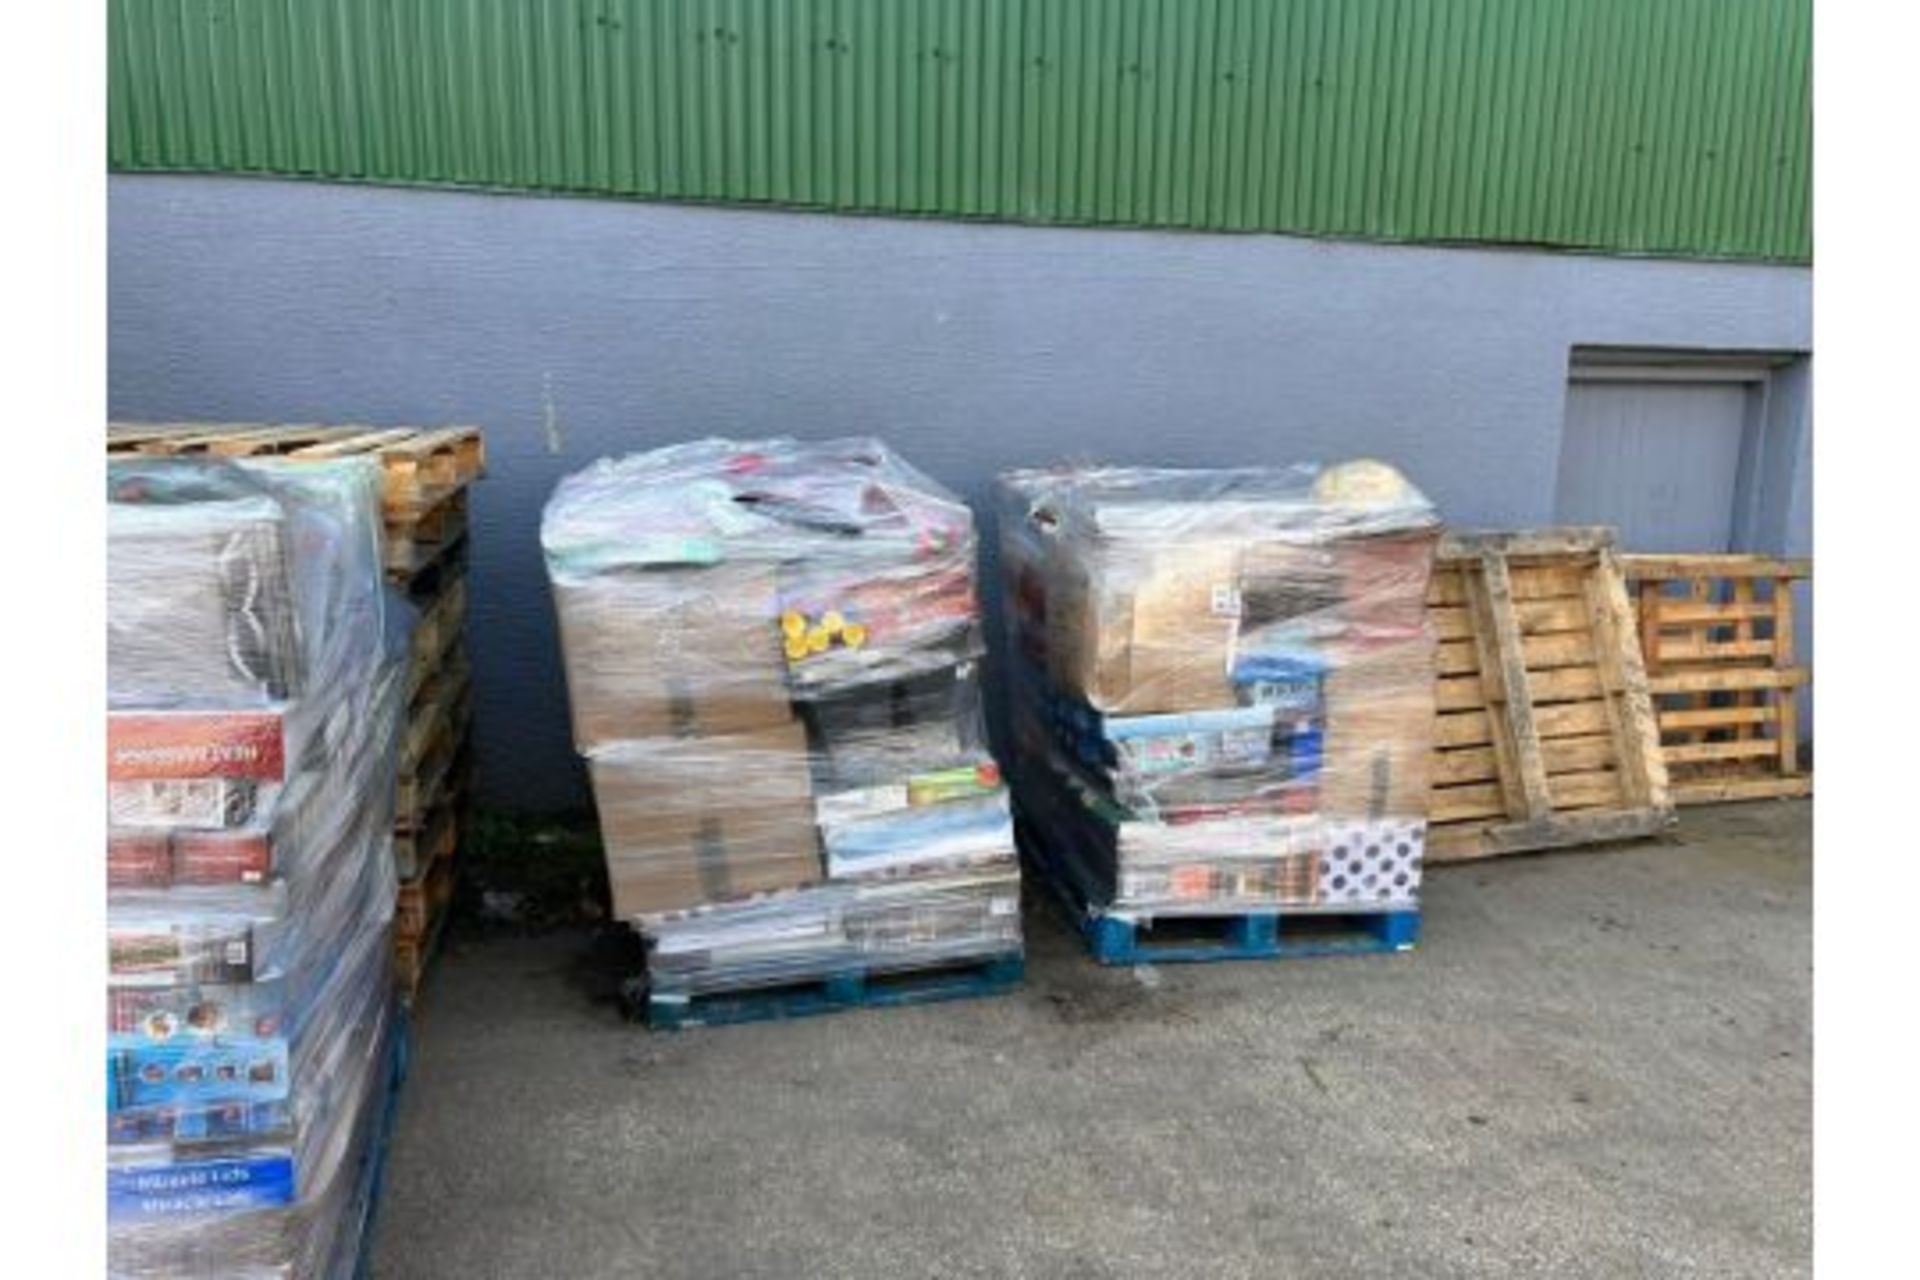 Large Pallet of Unchecked Supermarket Stock. Huge variety of items which may include: tools, toys, - Image 18 of 18